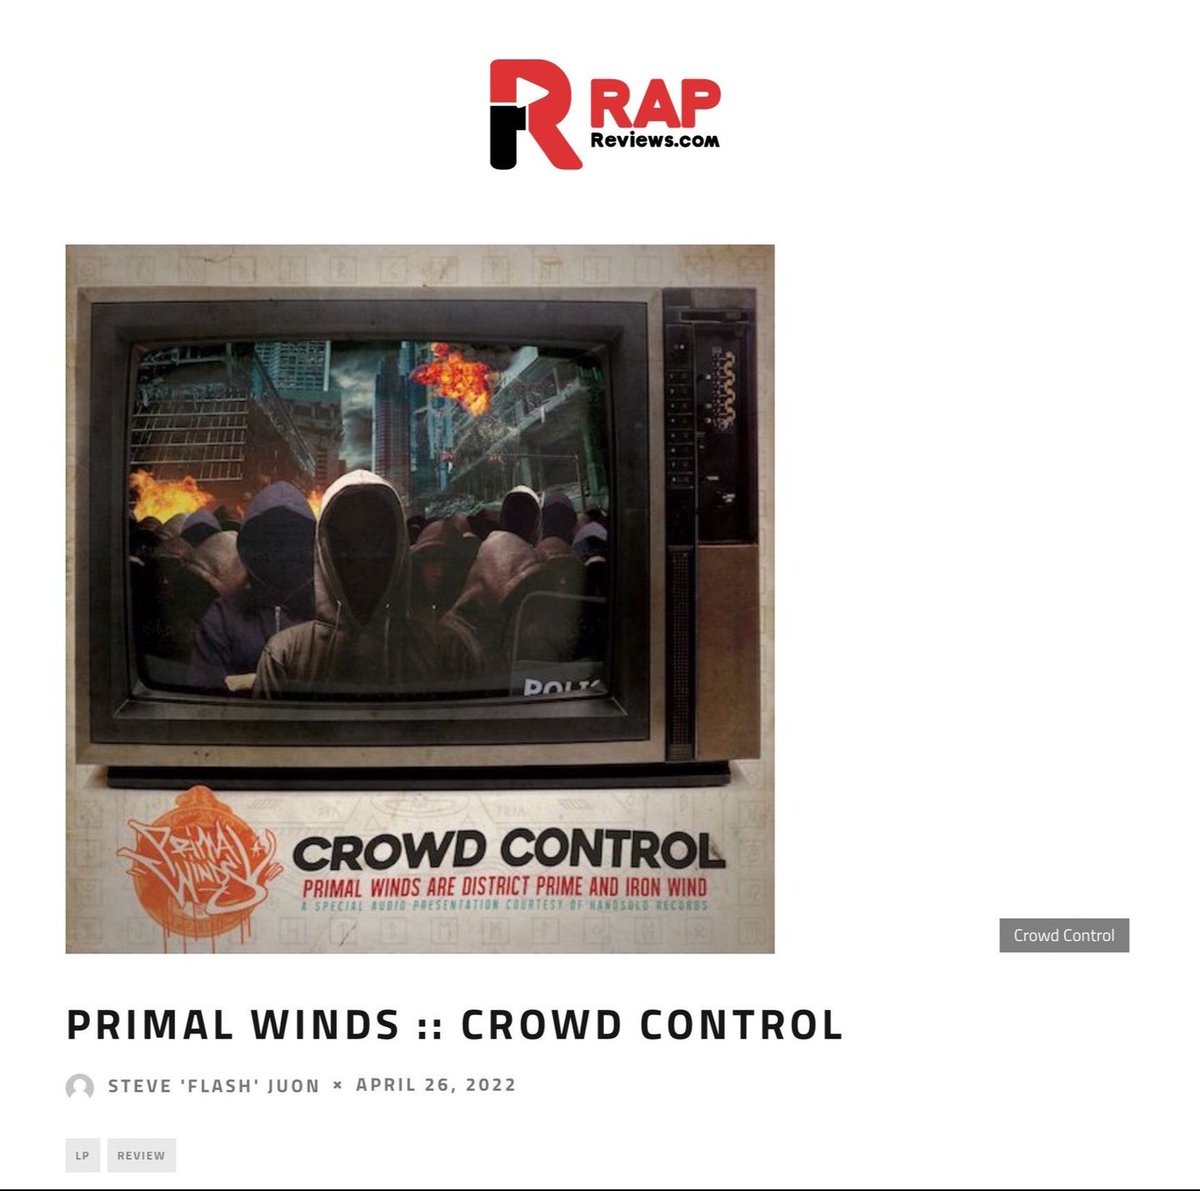 #BadAss #RapReview for @PrimalWindsRaps #CrowdControl @RapReviews scores a 8 out of 10 🤜💥🤛